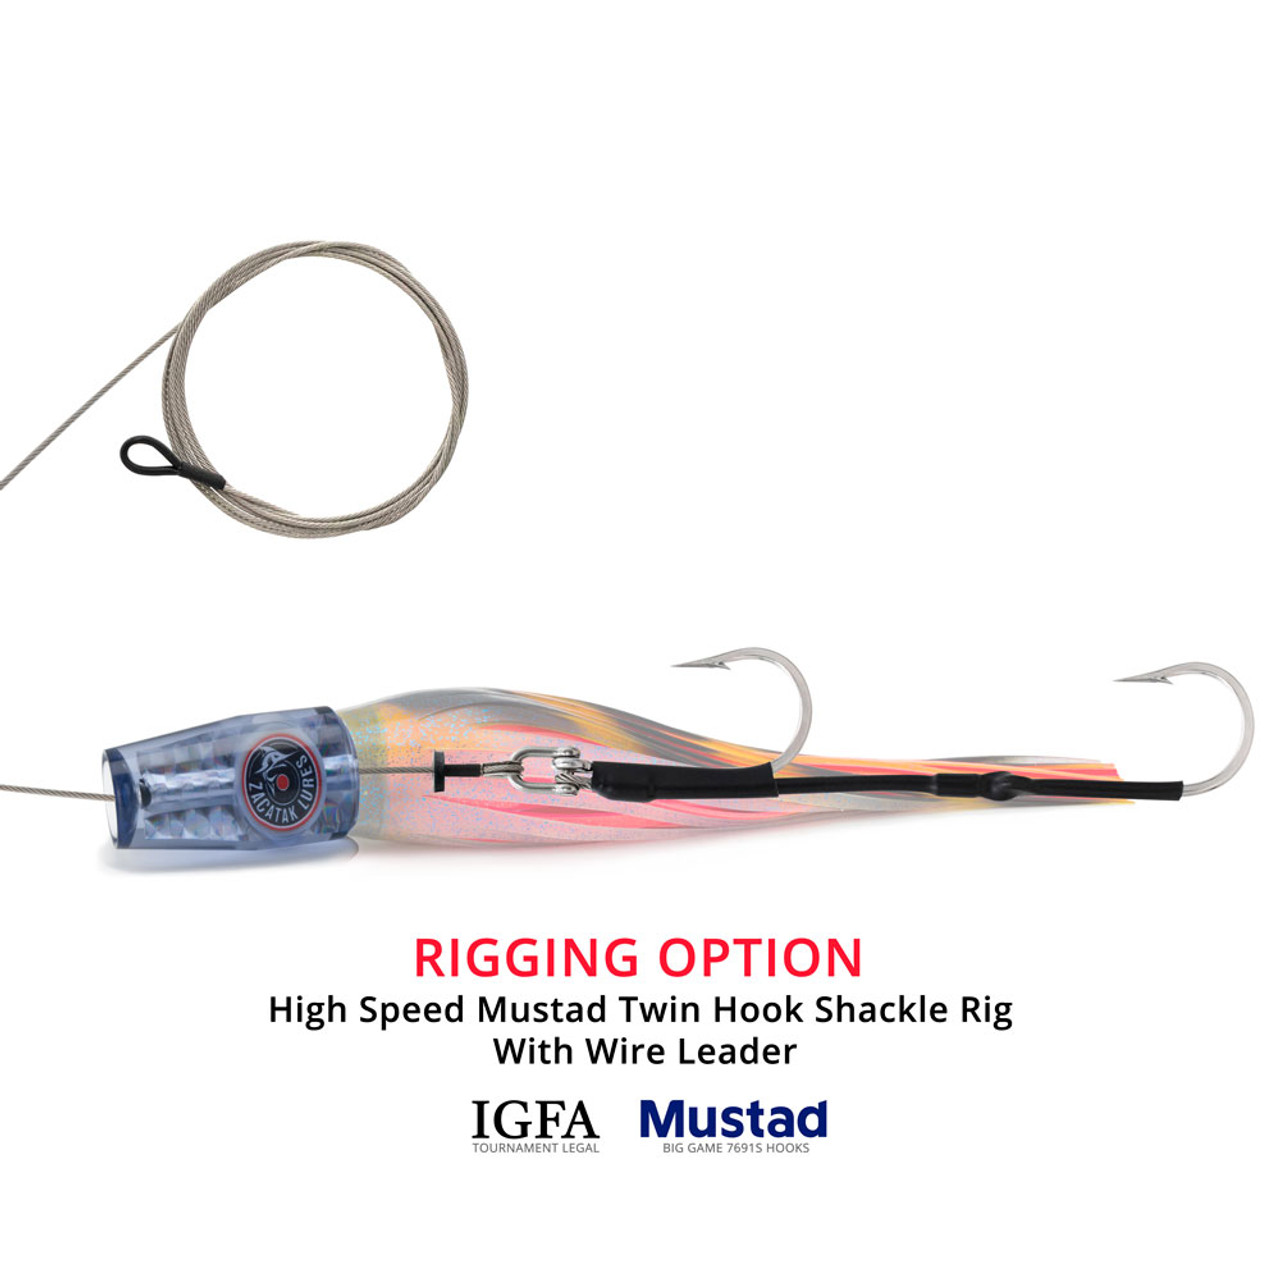 https://cdn11.bigcommerce.com/s-sv4r4mic/images/stencil/1280x1280/products/9529/49532/zacatak-lures-high-speed-rigging-option-twin-hook-shackle-rig-smoka__90780.1671433972.jpg?c=2?imbypass=on